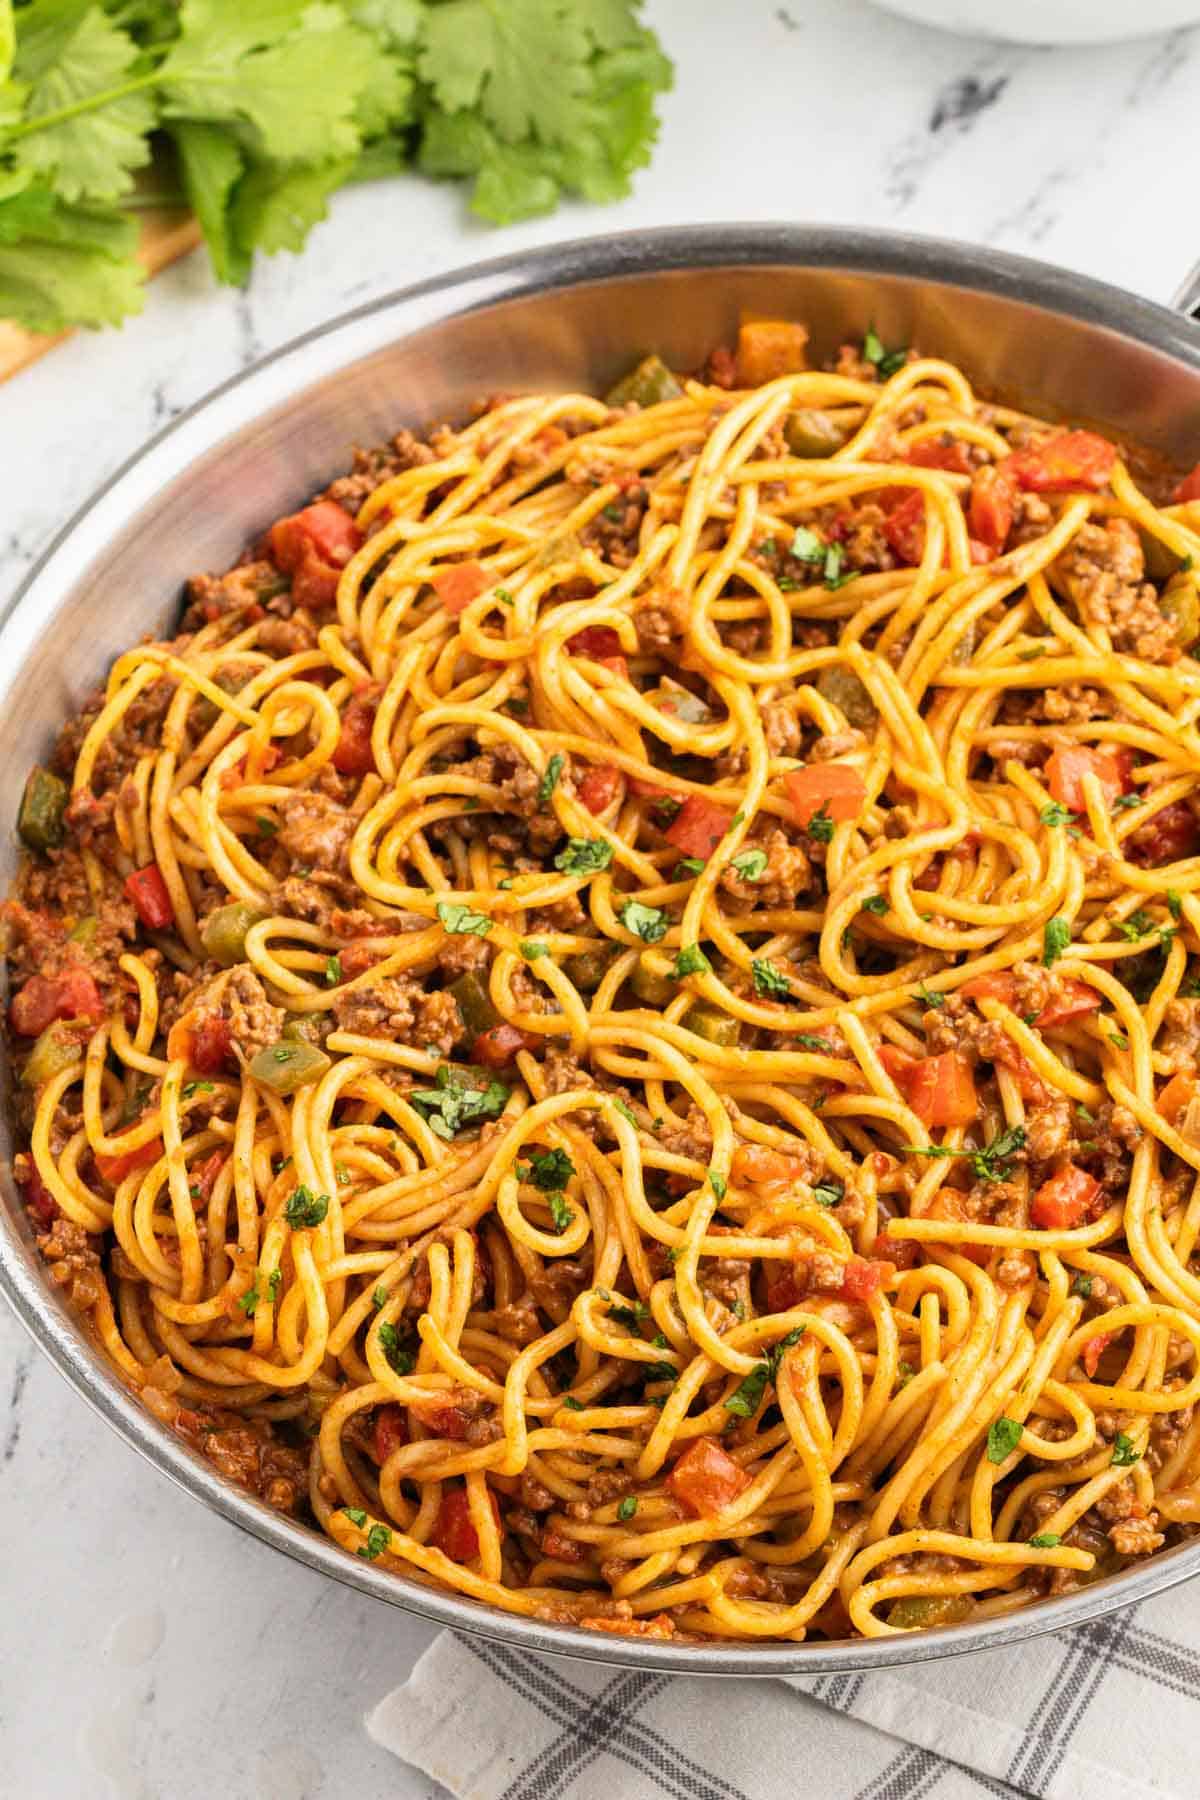 A pan full of spaghetti with meat and vegetables.